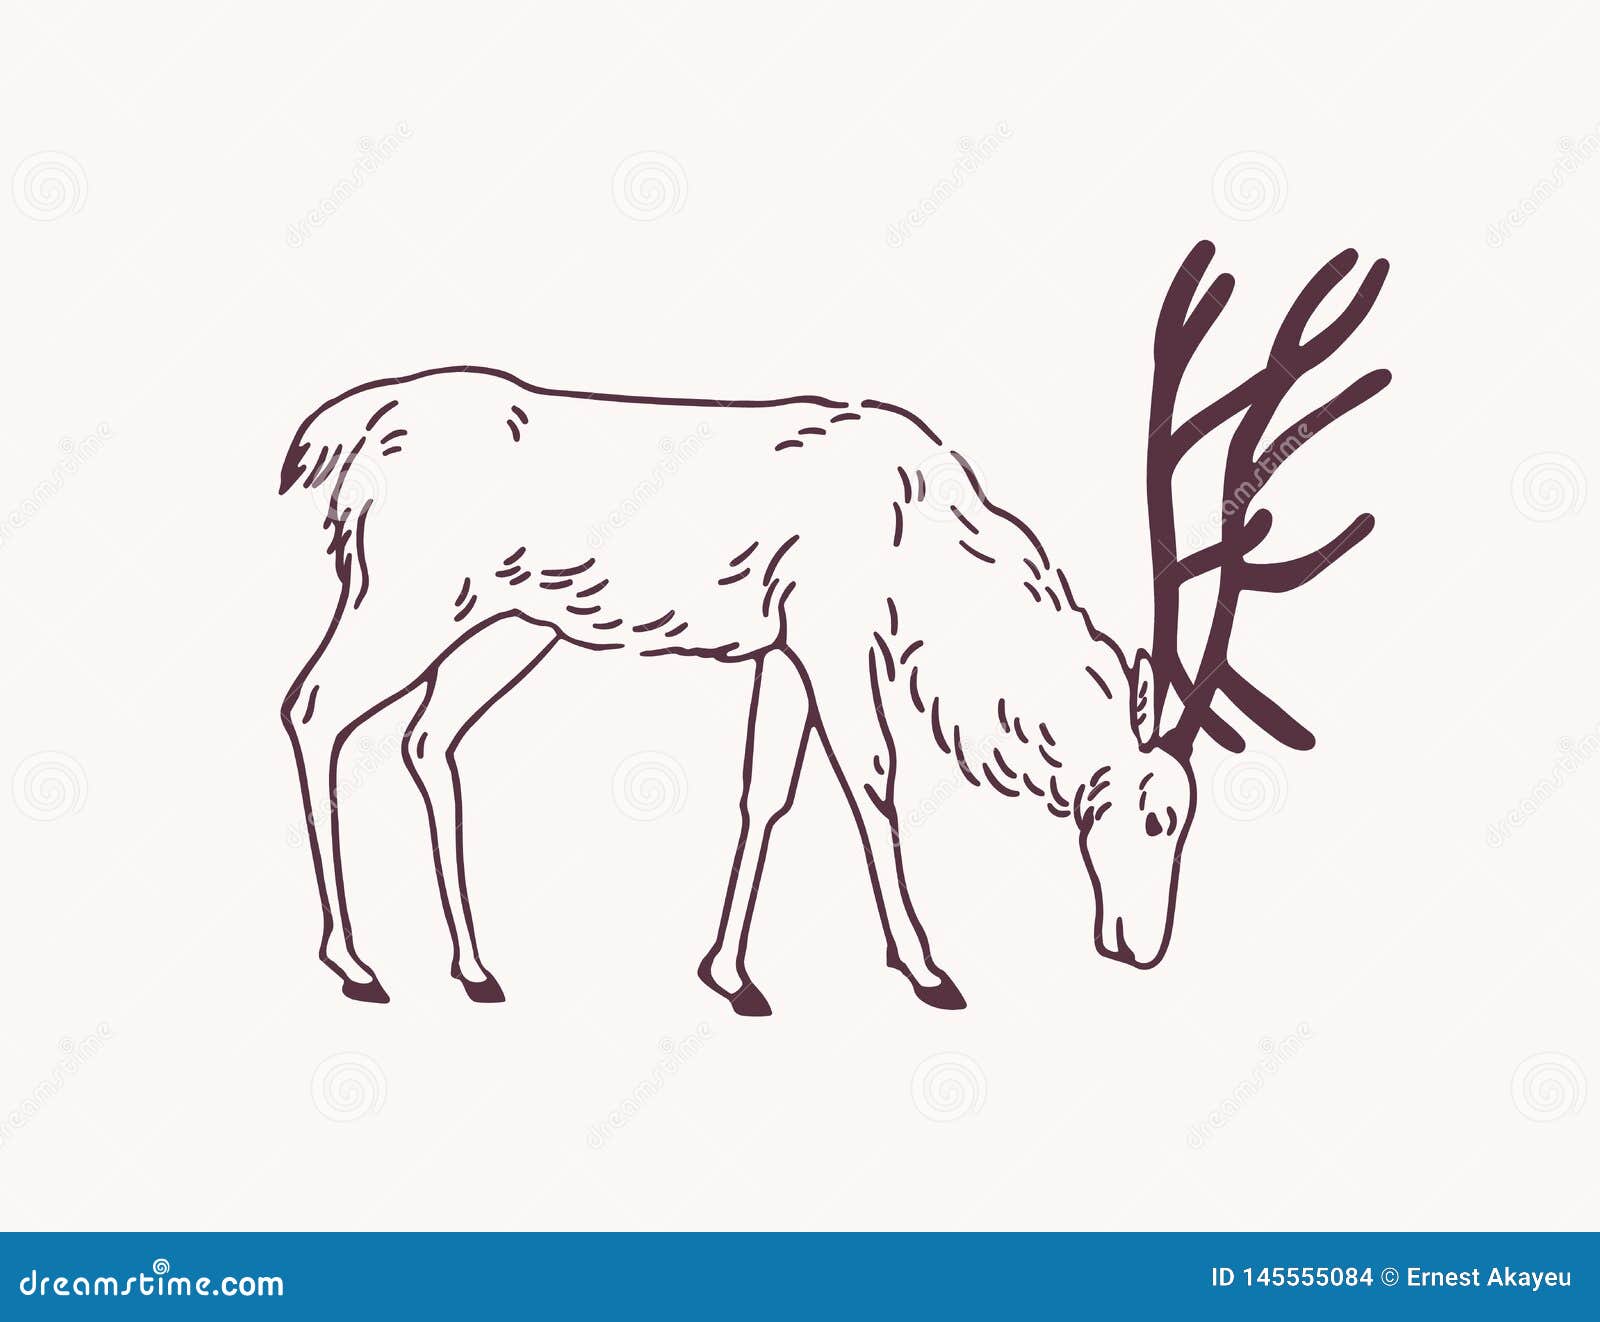 Male Deer, Reindeer or Stag Grazing on Pasture Hand Drawn with Contour  Lines on Light Background. Decorative Drawing of Stock Vector -  Illustration of drawing, antlers: 145555084